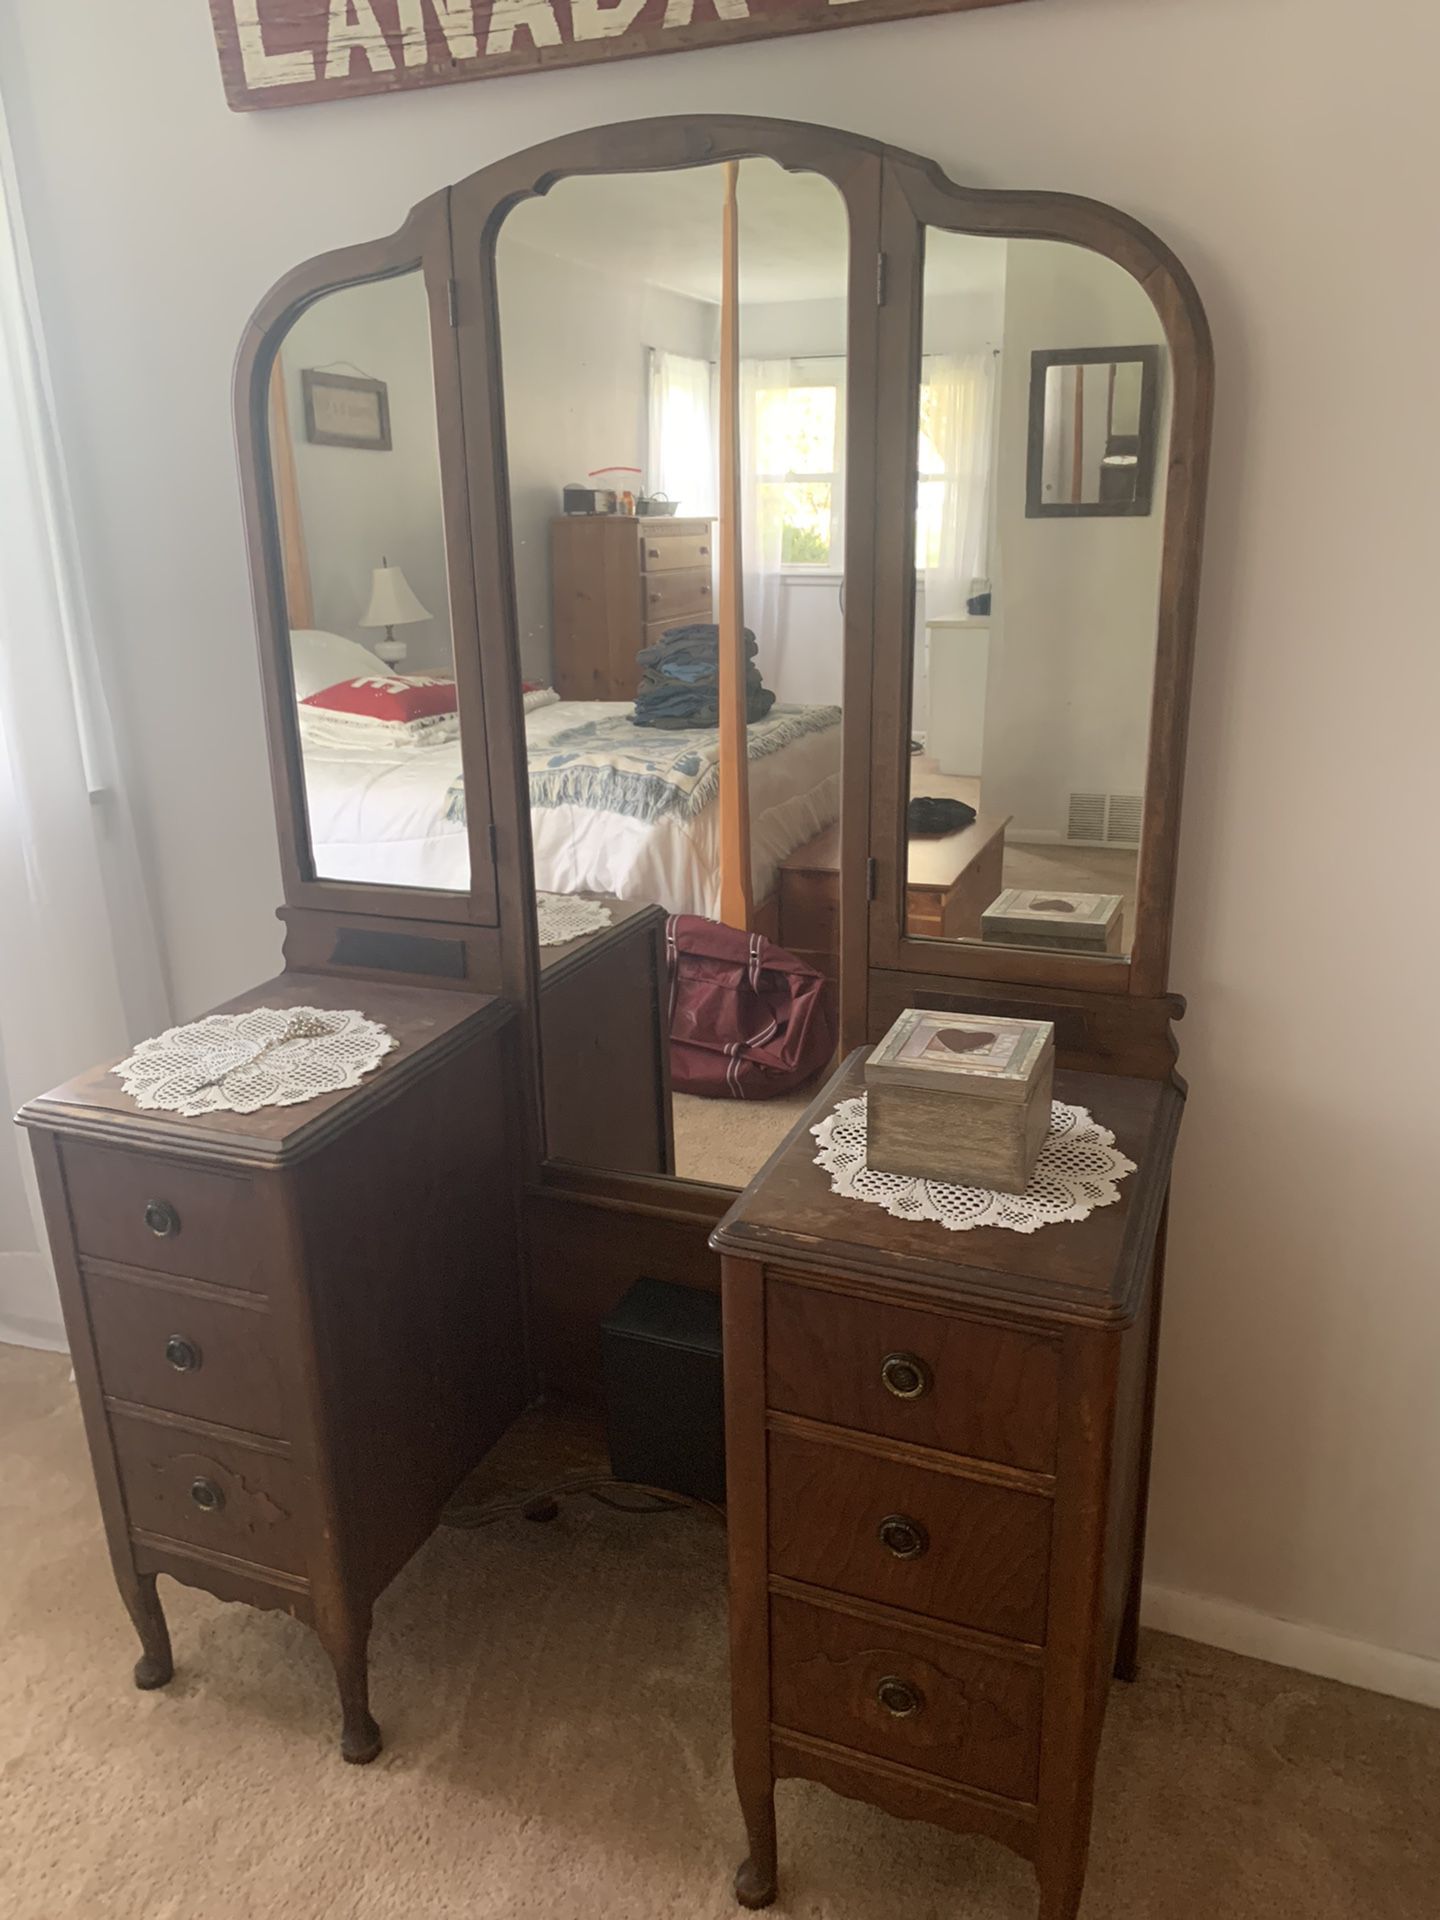 Bedroom set with dressers and vanity